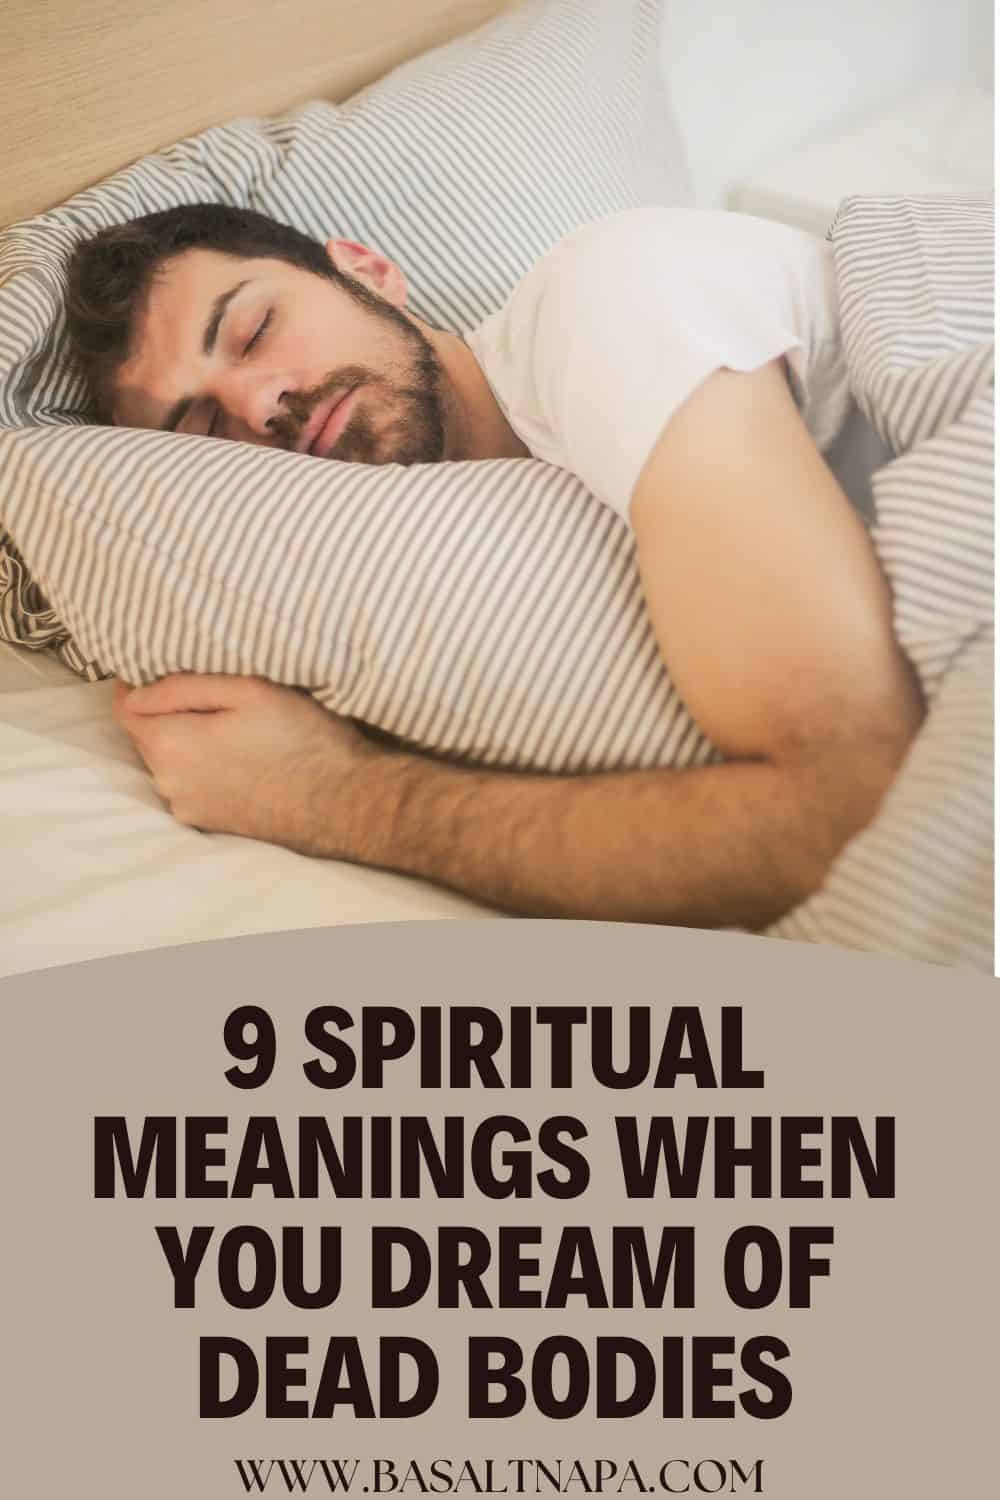 9 Spiritual Meanings When You Dream of Dead Bodies